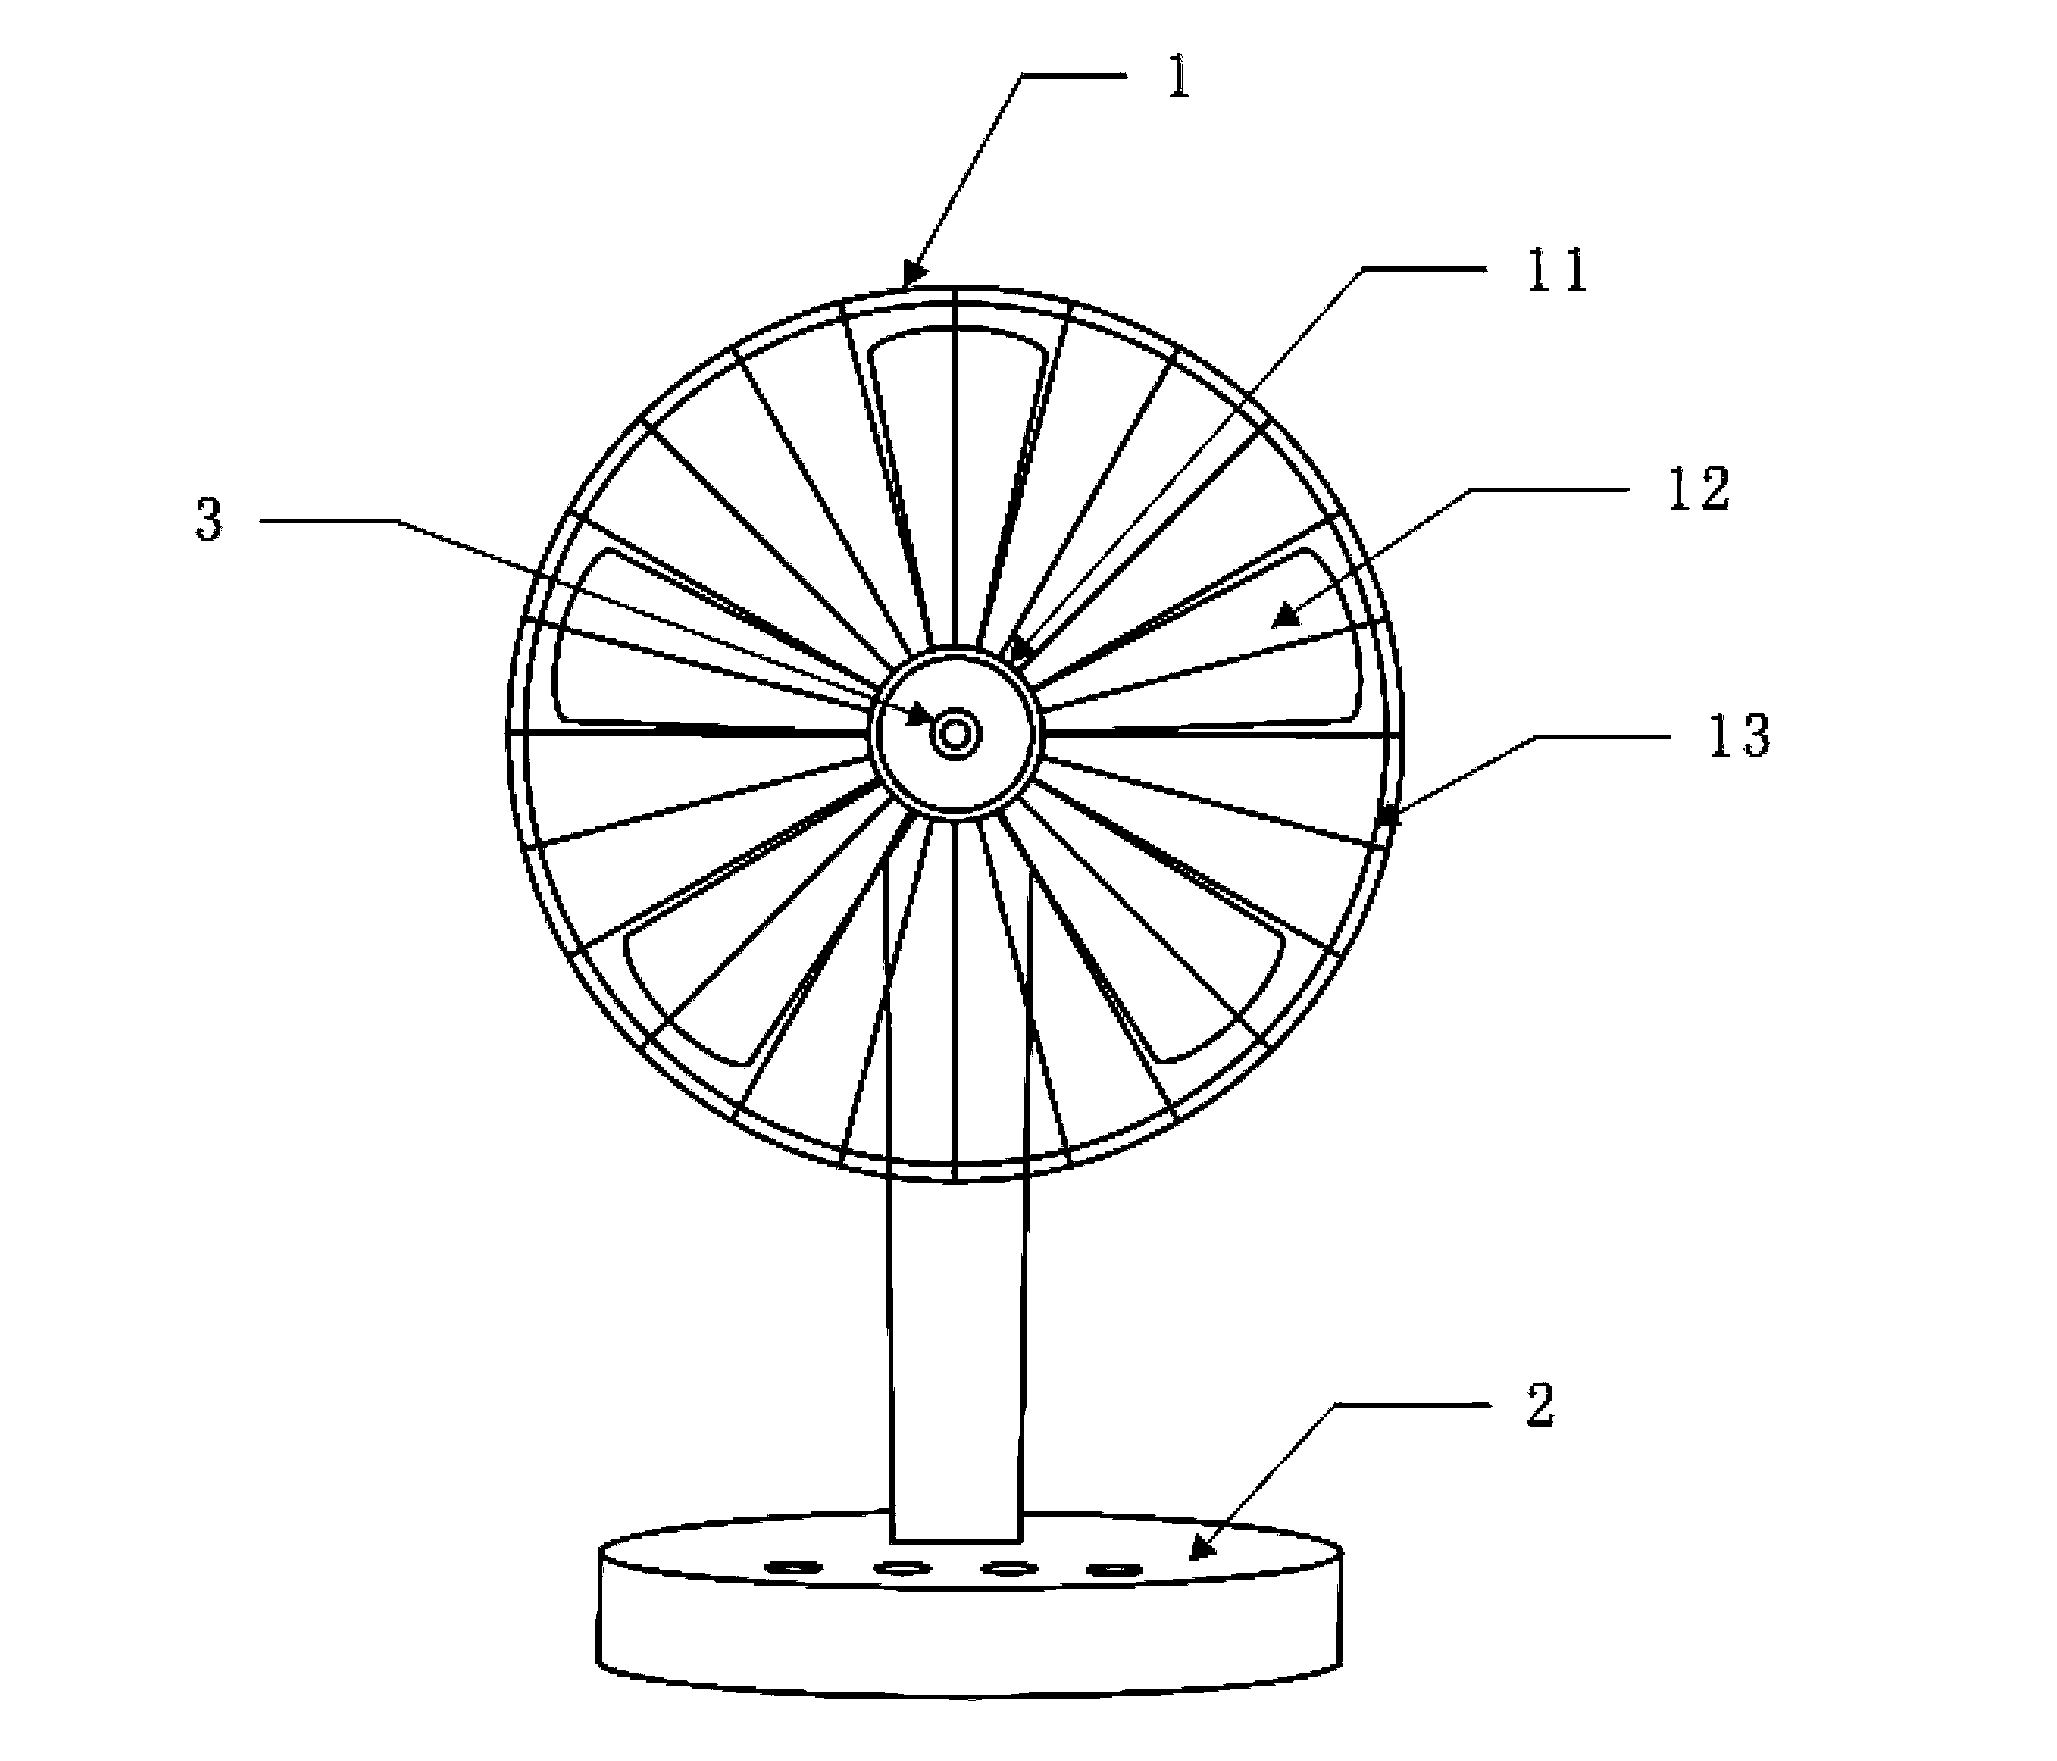 Electric fan capable of intelligently tracing user